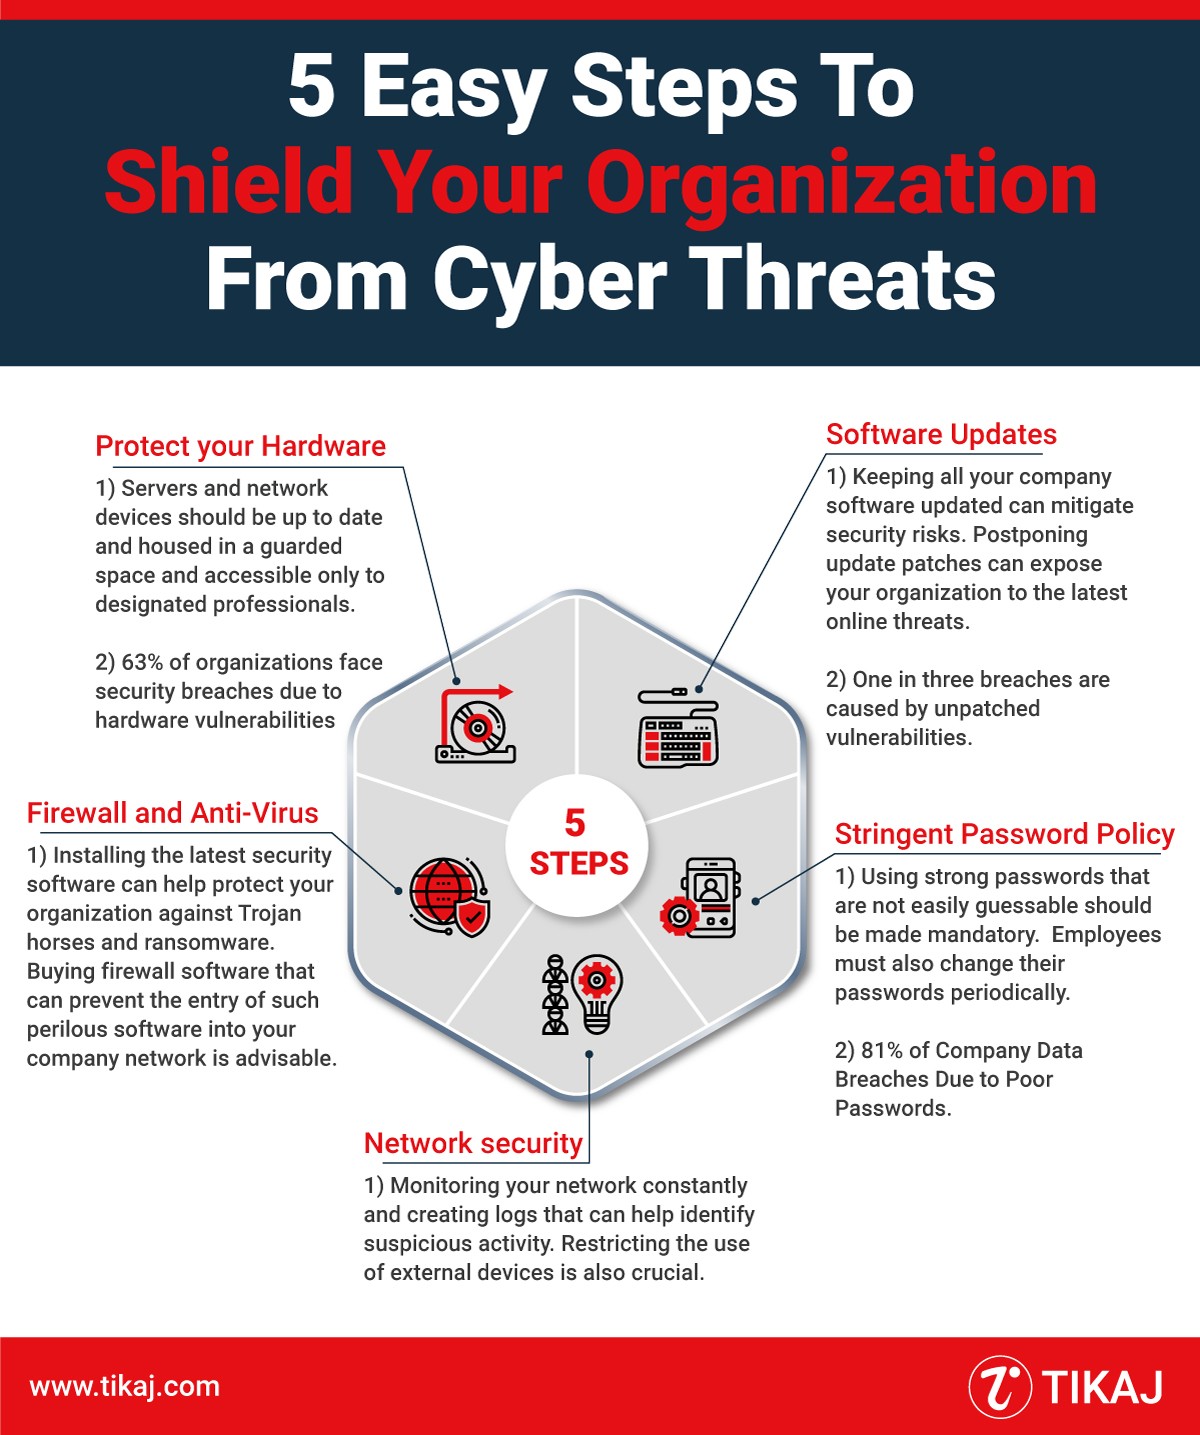 5 Easy steps to shield your organization from cyber threats